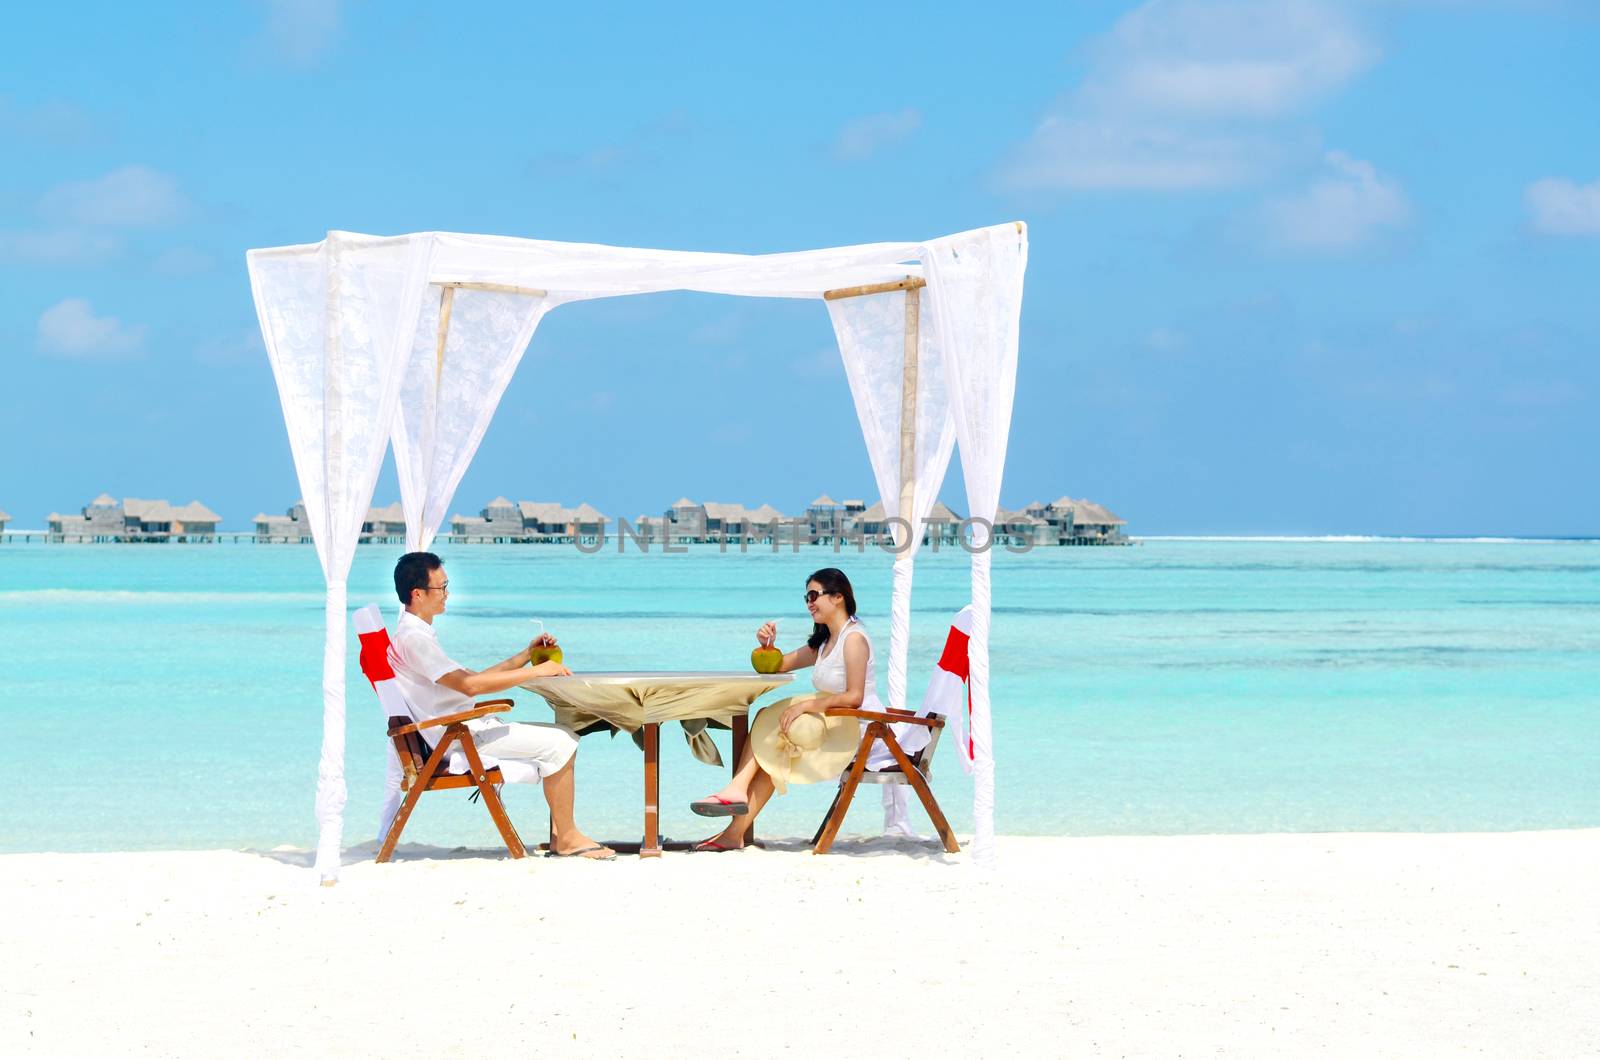 Asian couple enjoying romantic luxury lunch setting at tropical beach in Maldives